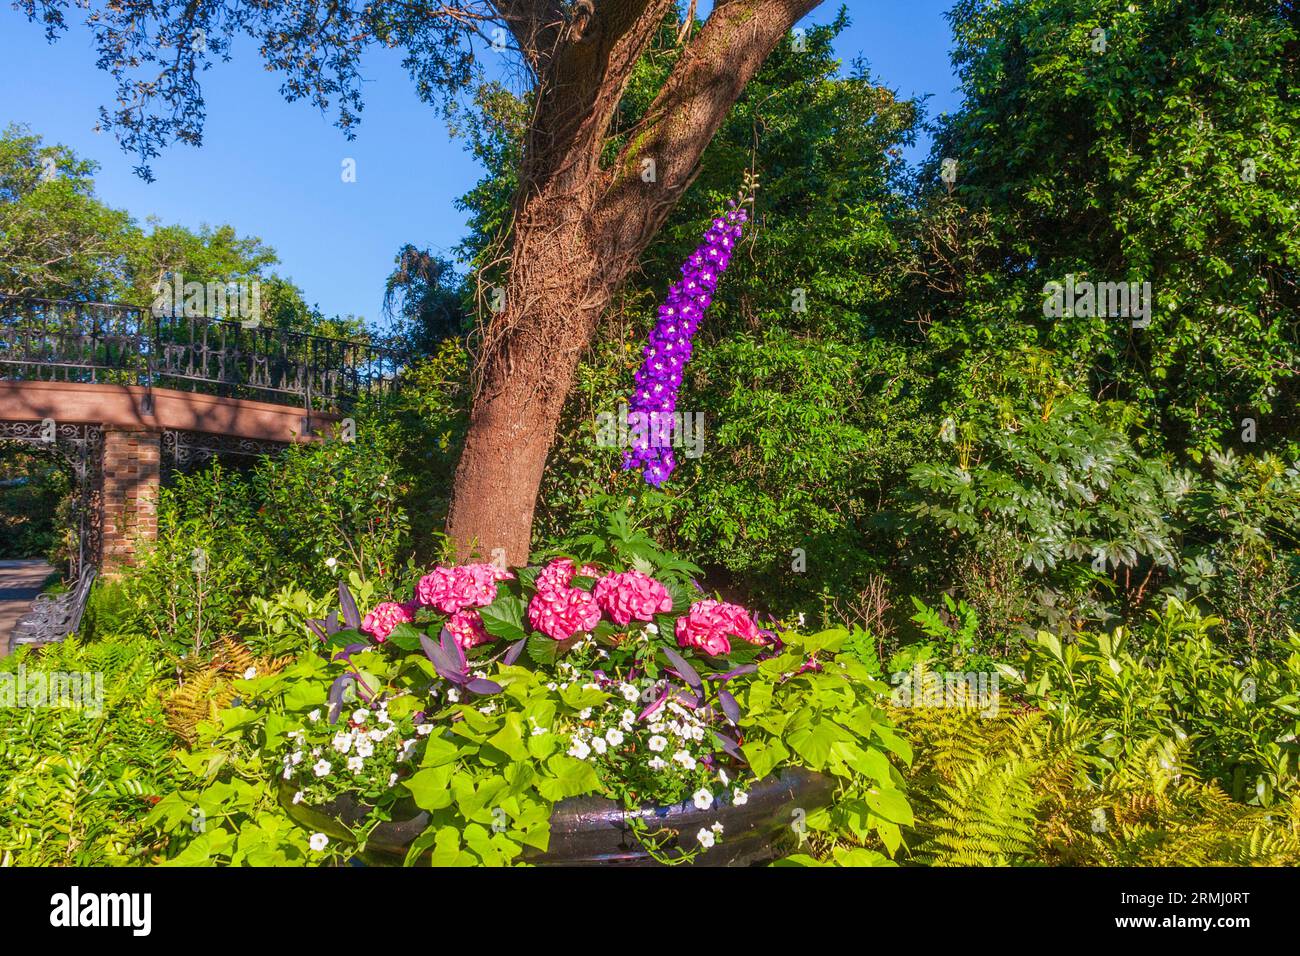 Garden scene with Hydrangeas and Larkspur at Bellingrath Gardens near Moblie, Alabama in early spring. Stock Photo